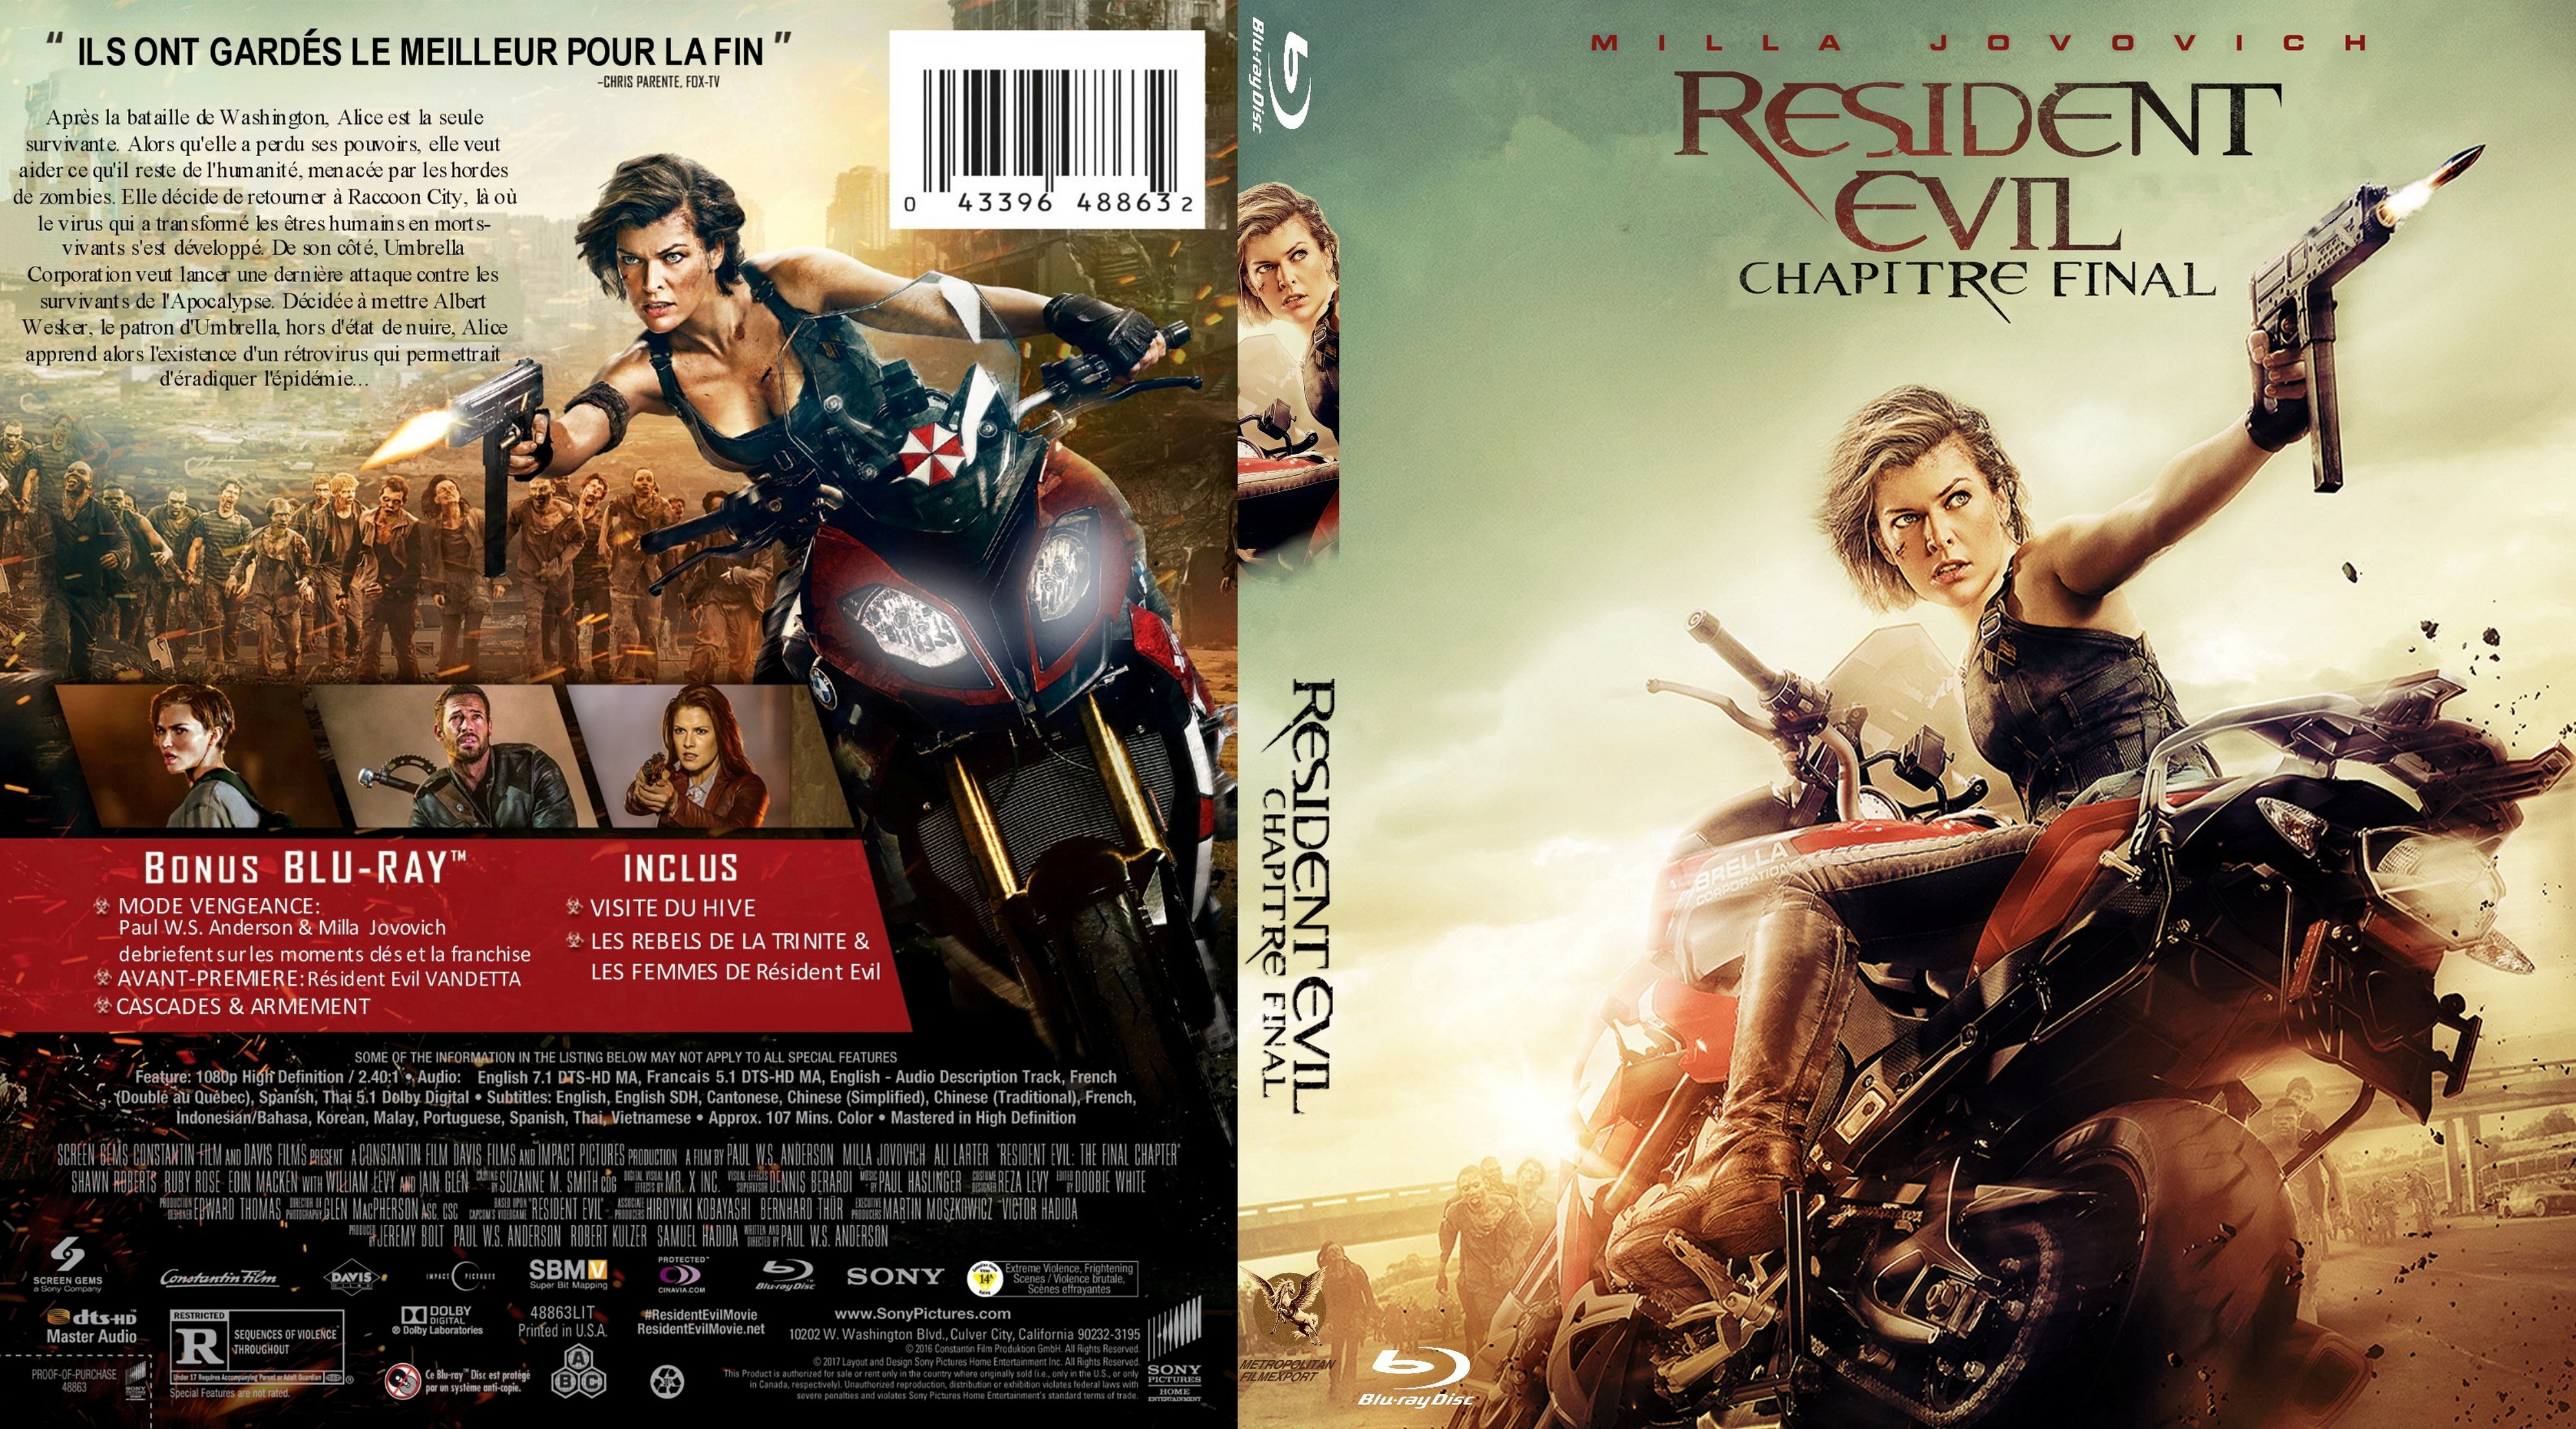 Jaquette DVD Resident Evil : Chapitre Final (BLU-RAY)